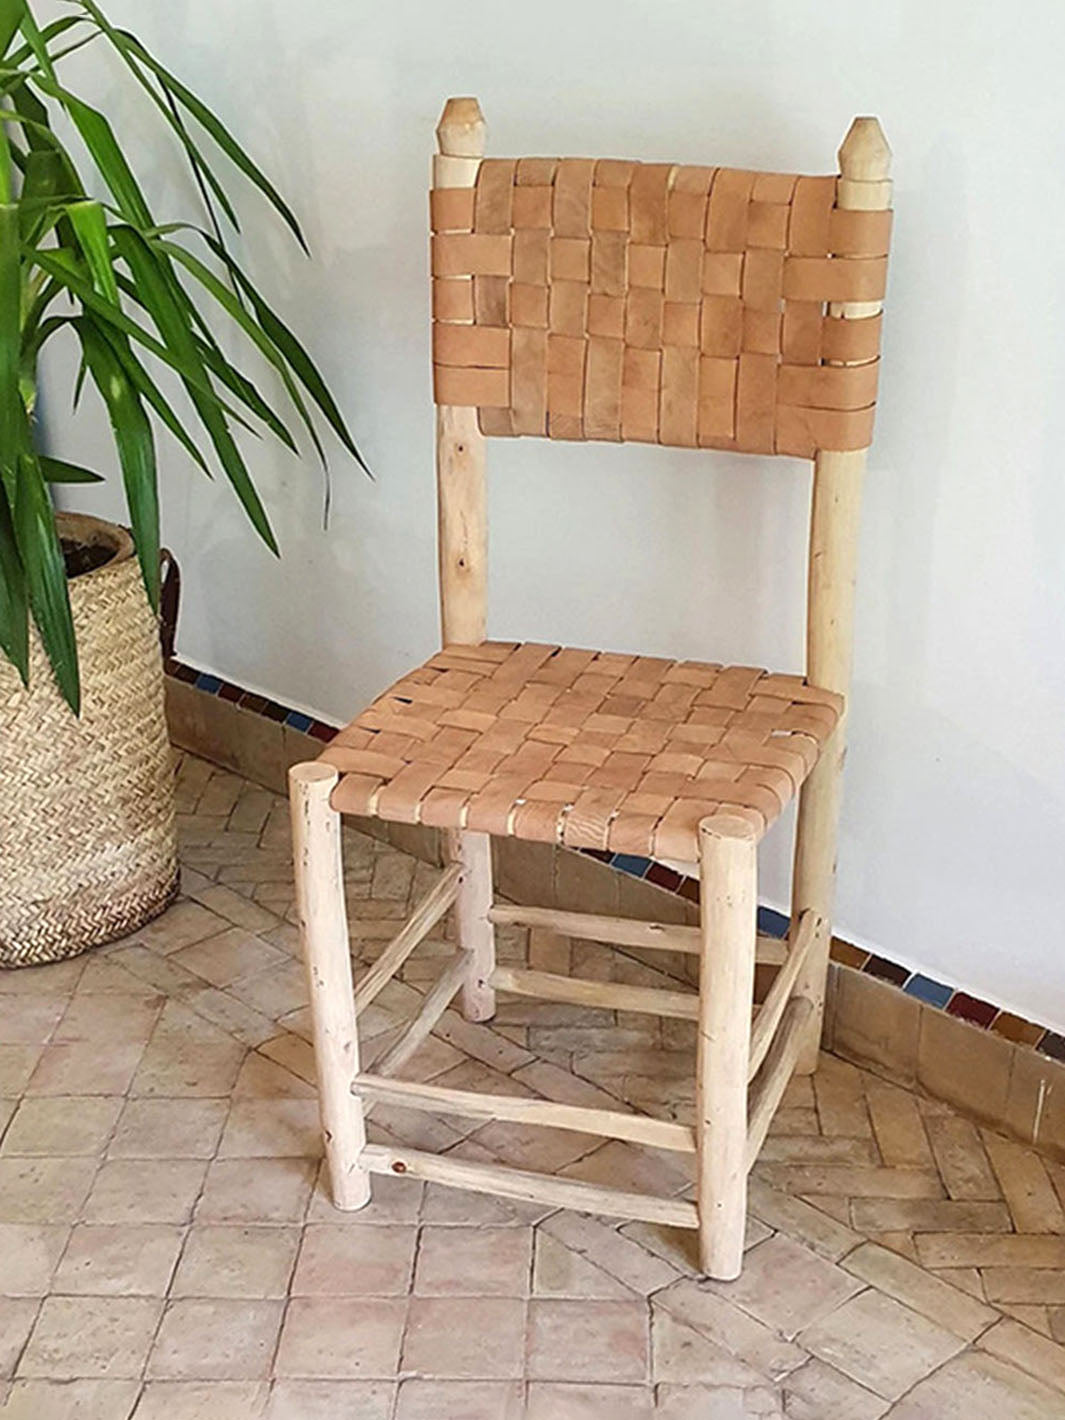 Handcrafted Artisanal Moroccan Laurel Wooden Chair Libitii Chairs LIB-0101-2